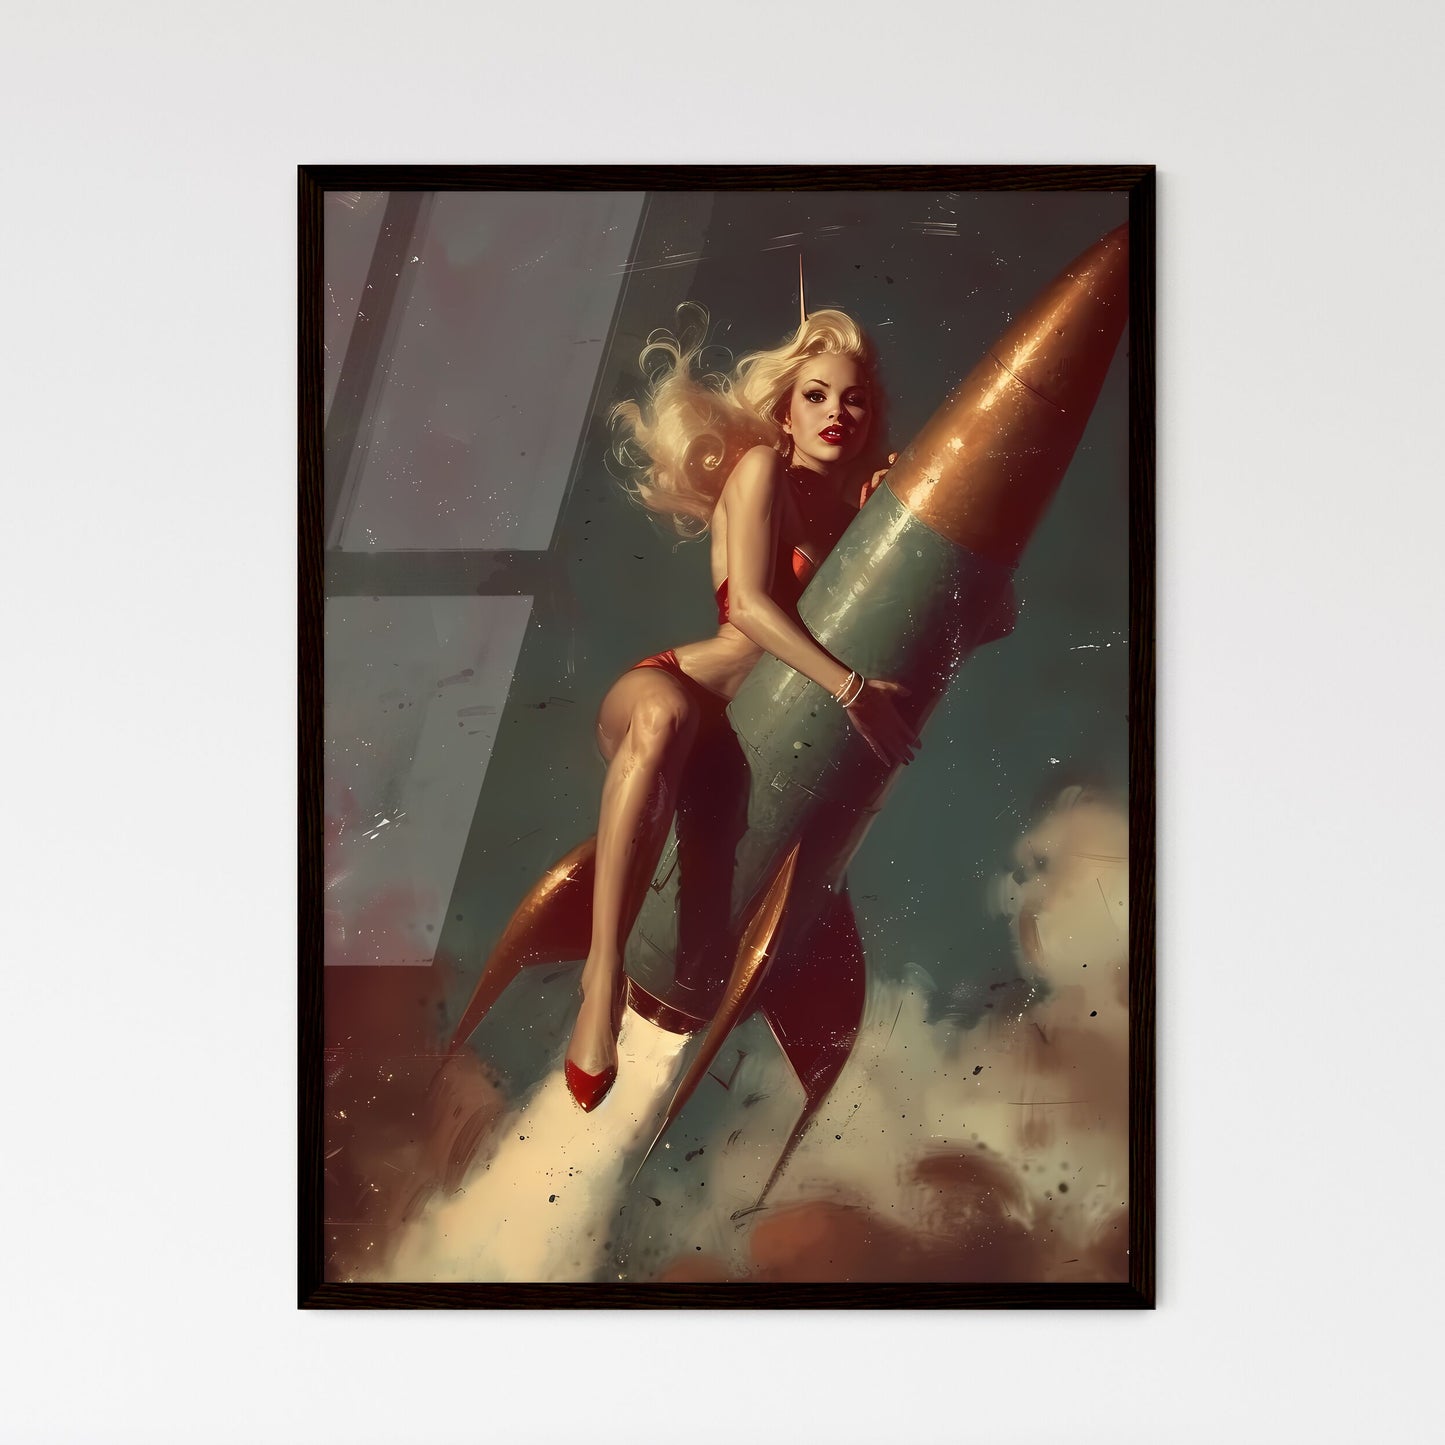 The head nurse sharply directed the nurses riding a rocket - Art print of a woman in garment holding a rocket Default Title